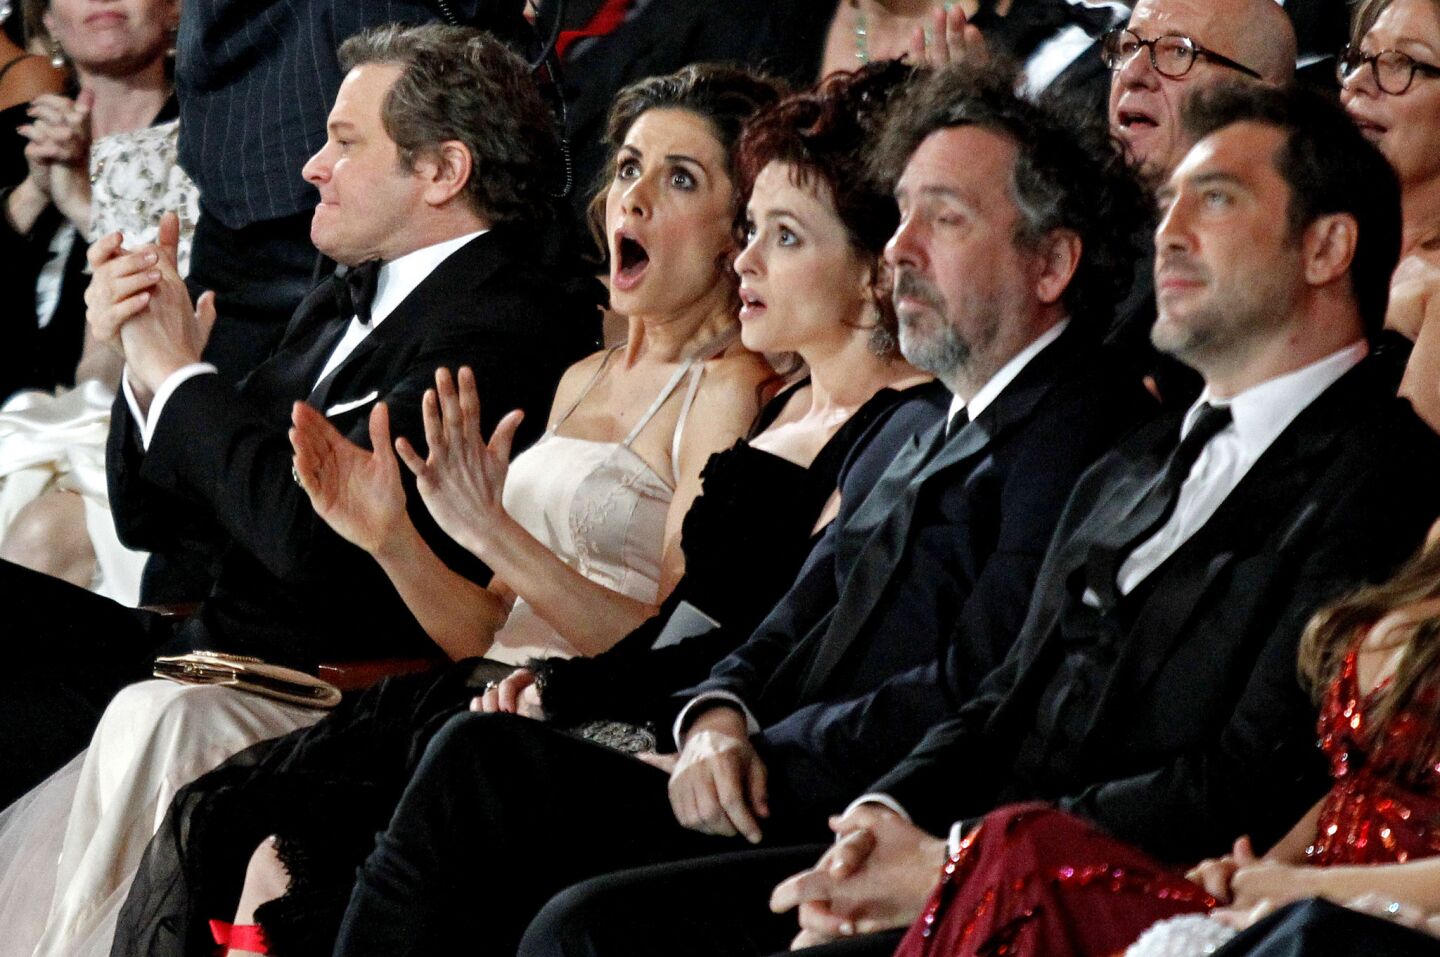 Actor Colin Firth and his wife, Livia Giuggioli, react after Tom Hooper wins best director for "The King's Speech," at the 83rd Academy Awards.